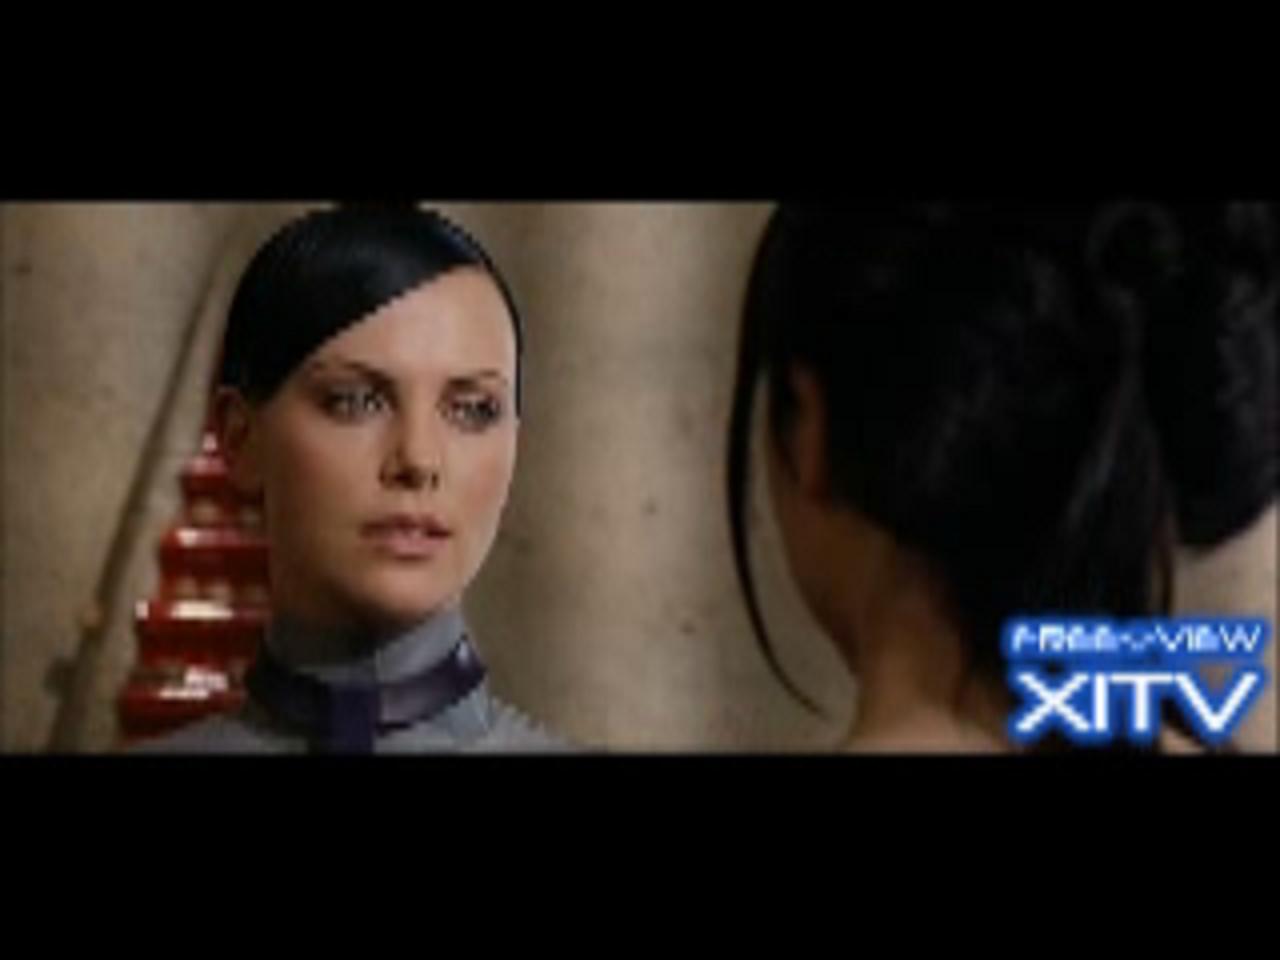 Watch Now! XITV FREE <> VIEW™ Aeon Flux! Starring Charlize Theron! XITV Is Must See TV!